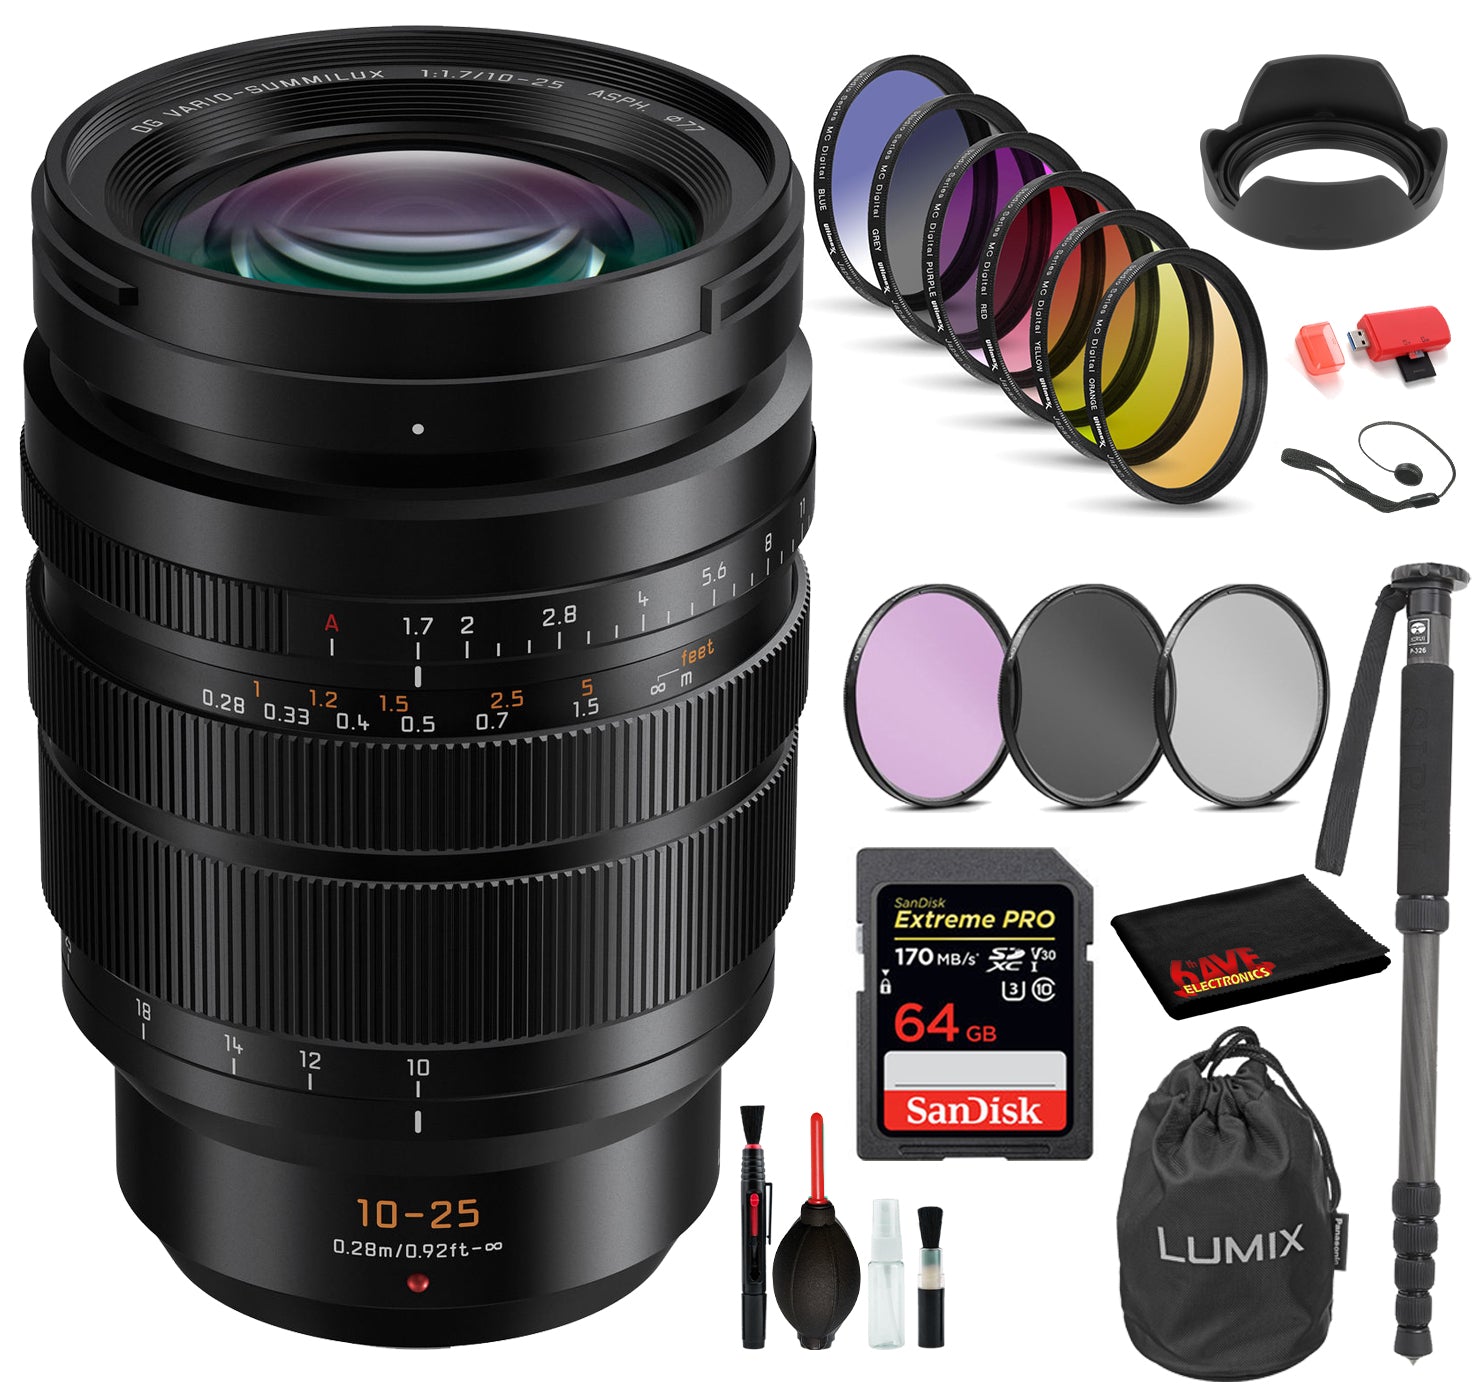 Panasonic Leica DG Vario-Summilux 10-25mm f/1.7 ASPH. Lens with: Sandisk Extreme Pro 64GB SD Card, 9PC Filter Kit + More